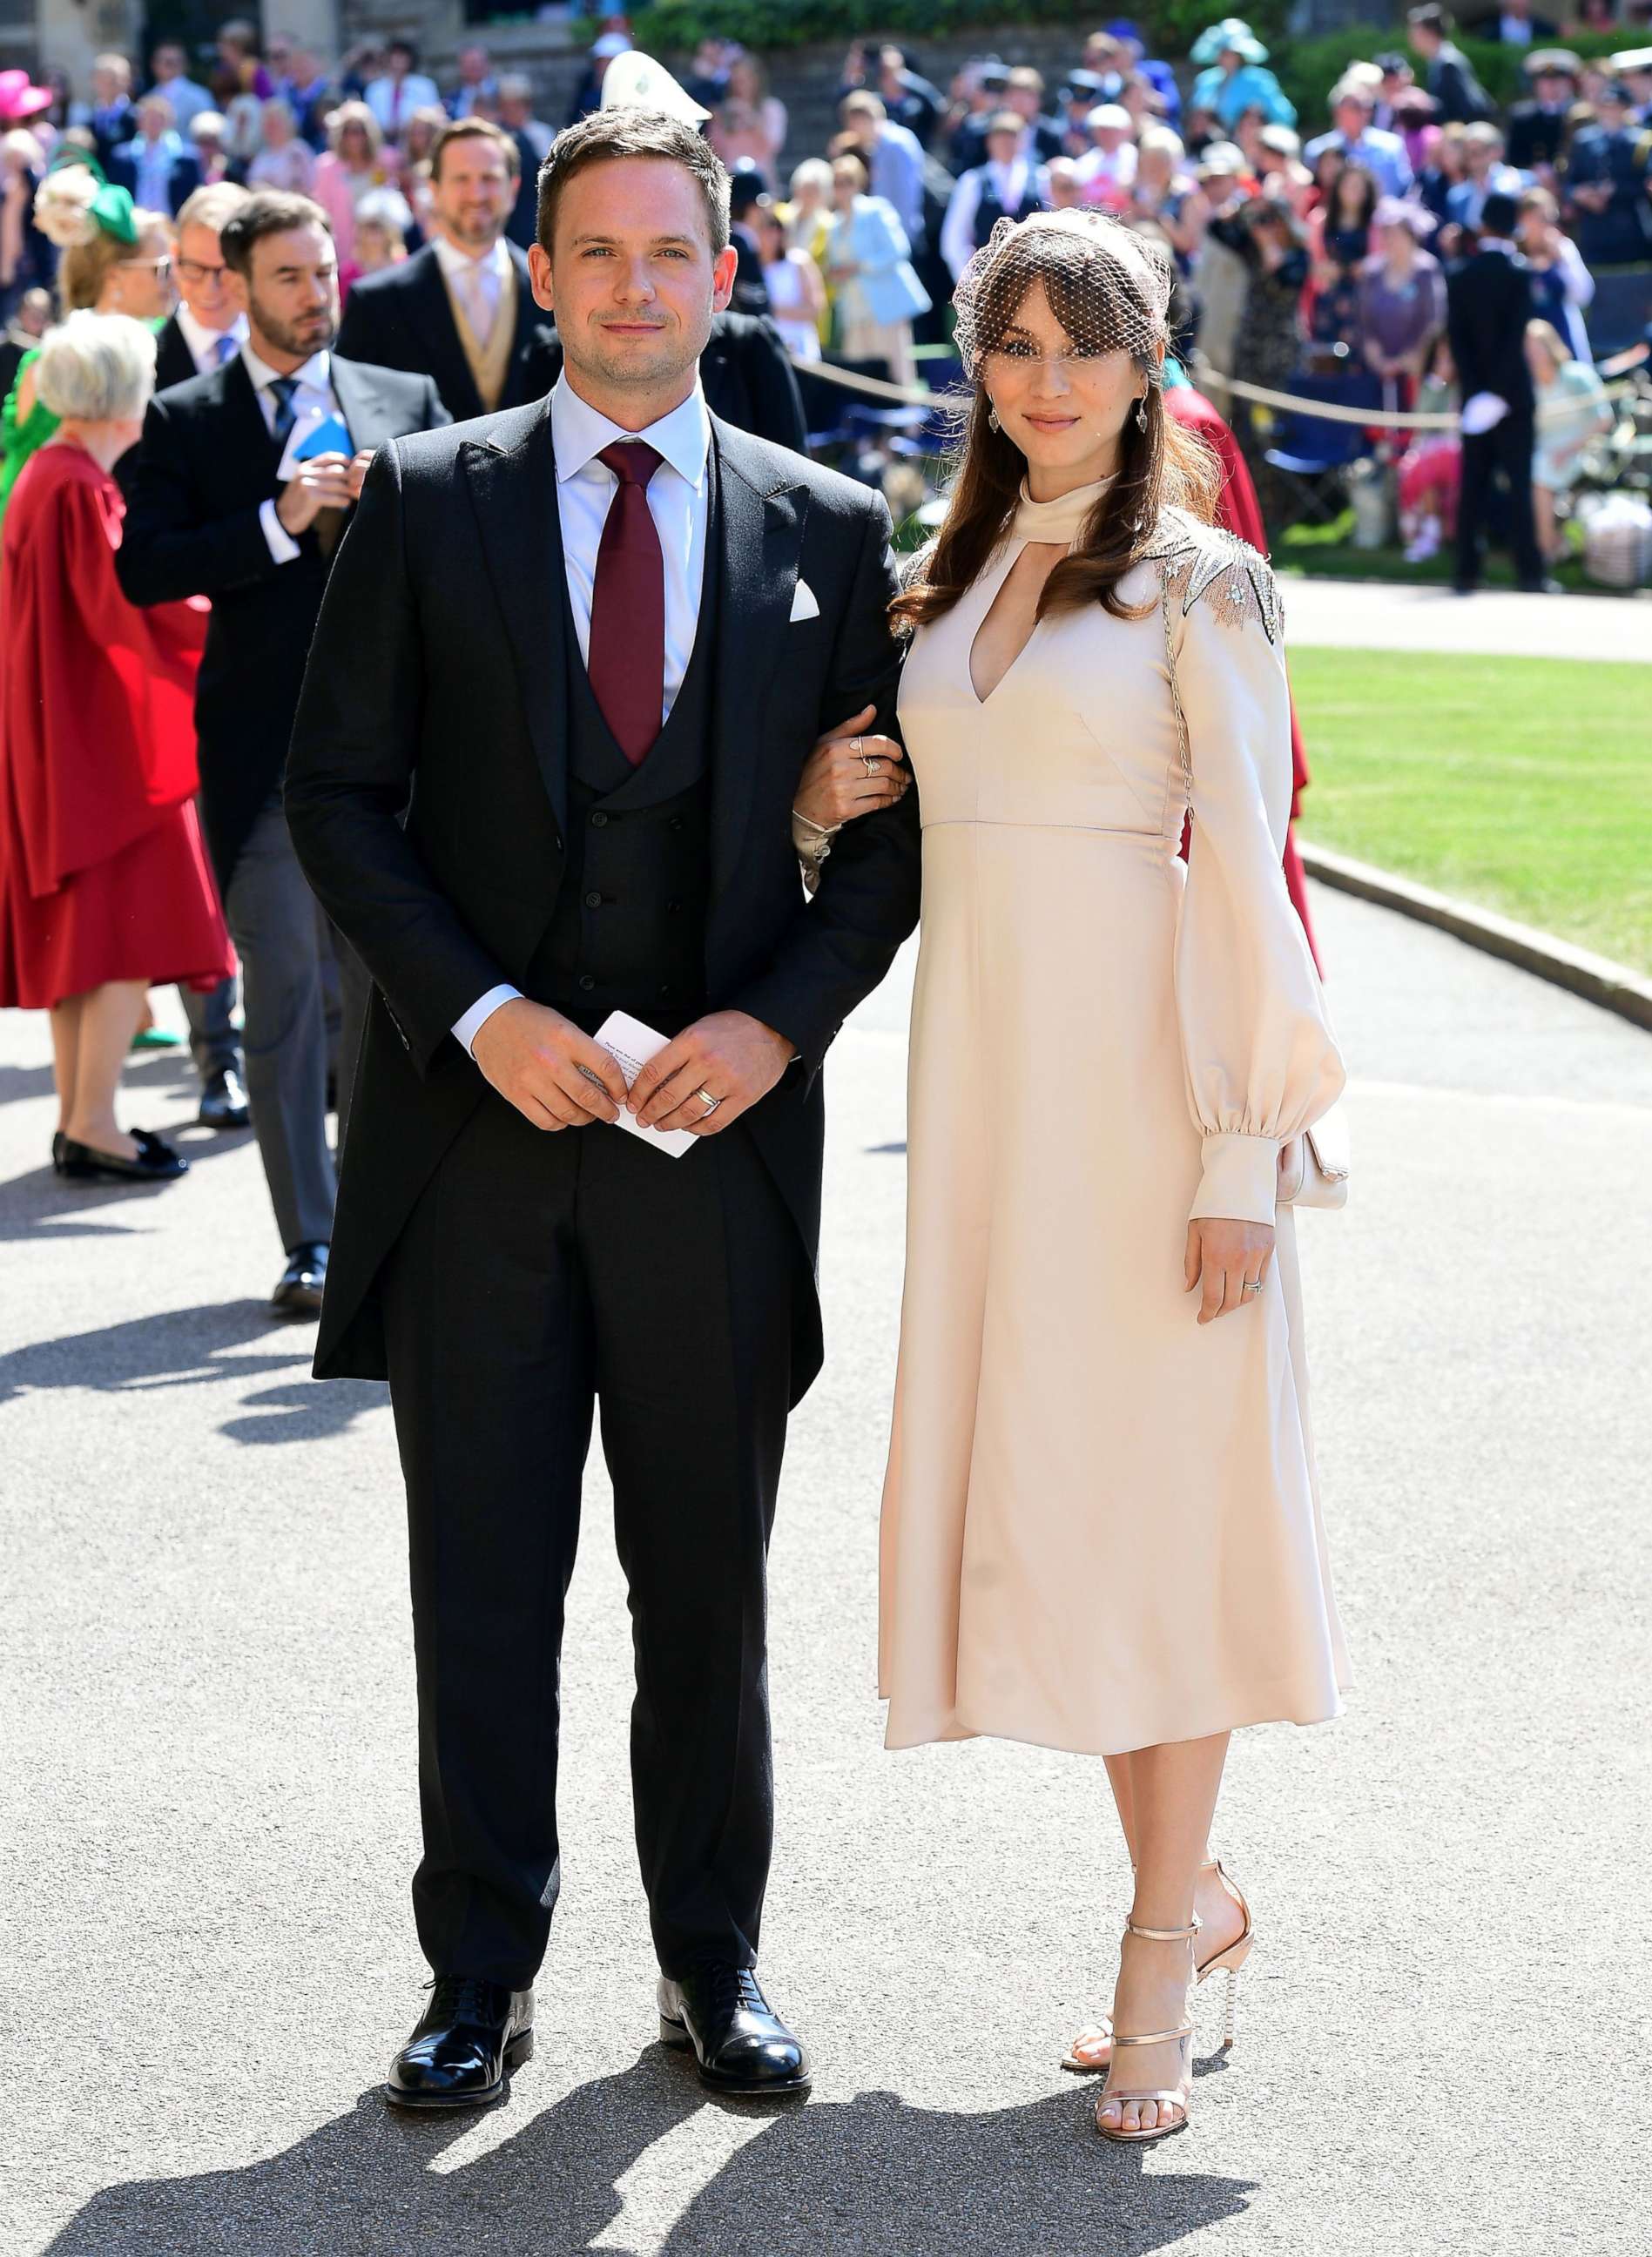 PHOTO: Meghan Markle's friend, actor Patrick J. Adams and wife Troian Bellisario arrive for the wedding ceremony of Britain's Prince Harry, Duke of Sussex and US actress Meghan Markle at St George's Chapel, Windsor Castle, in Windsor, May 19, 2018.